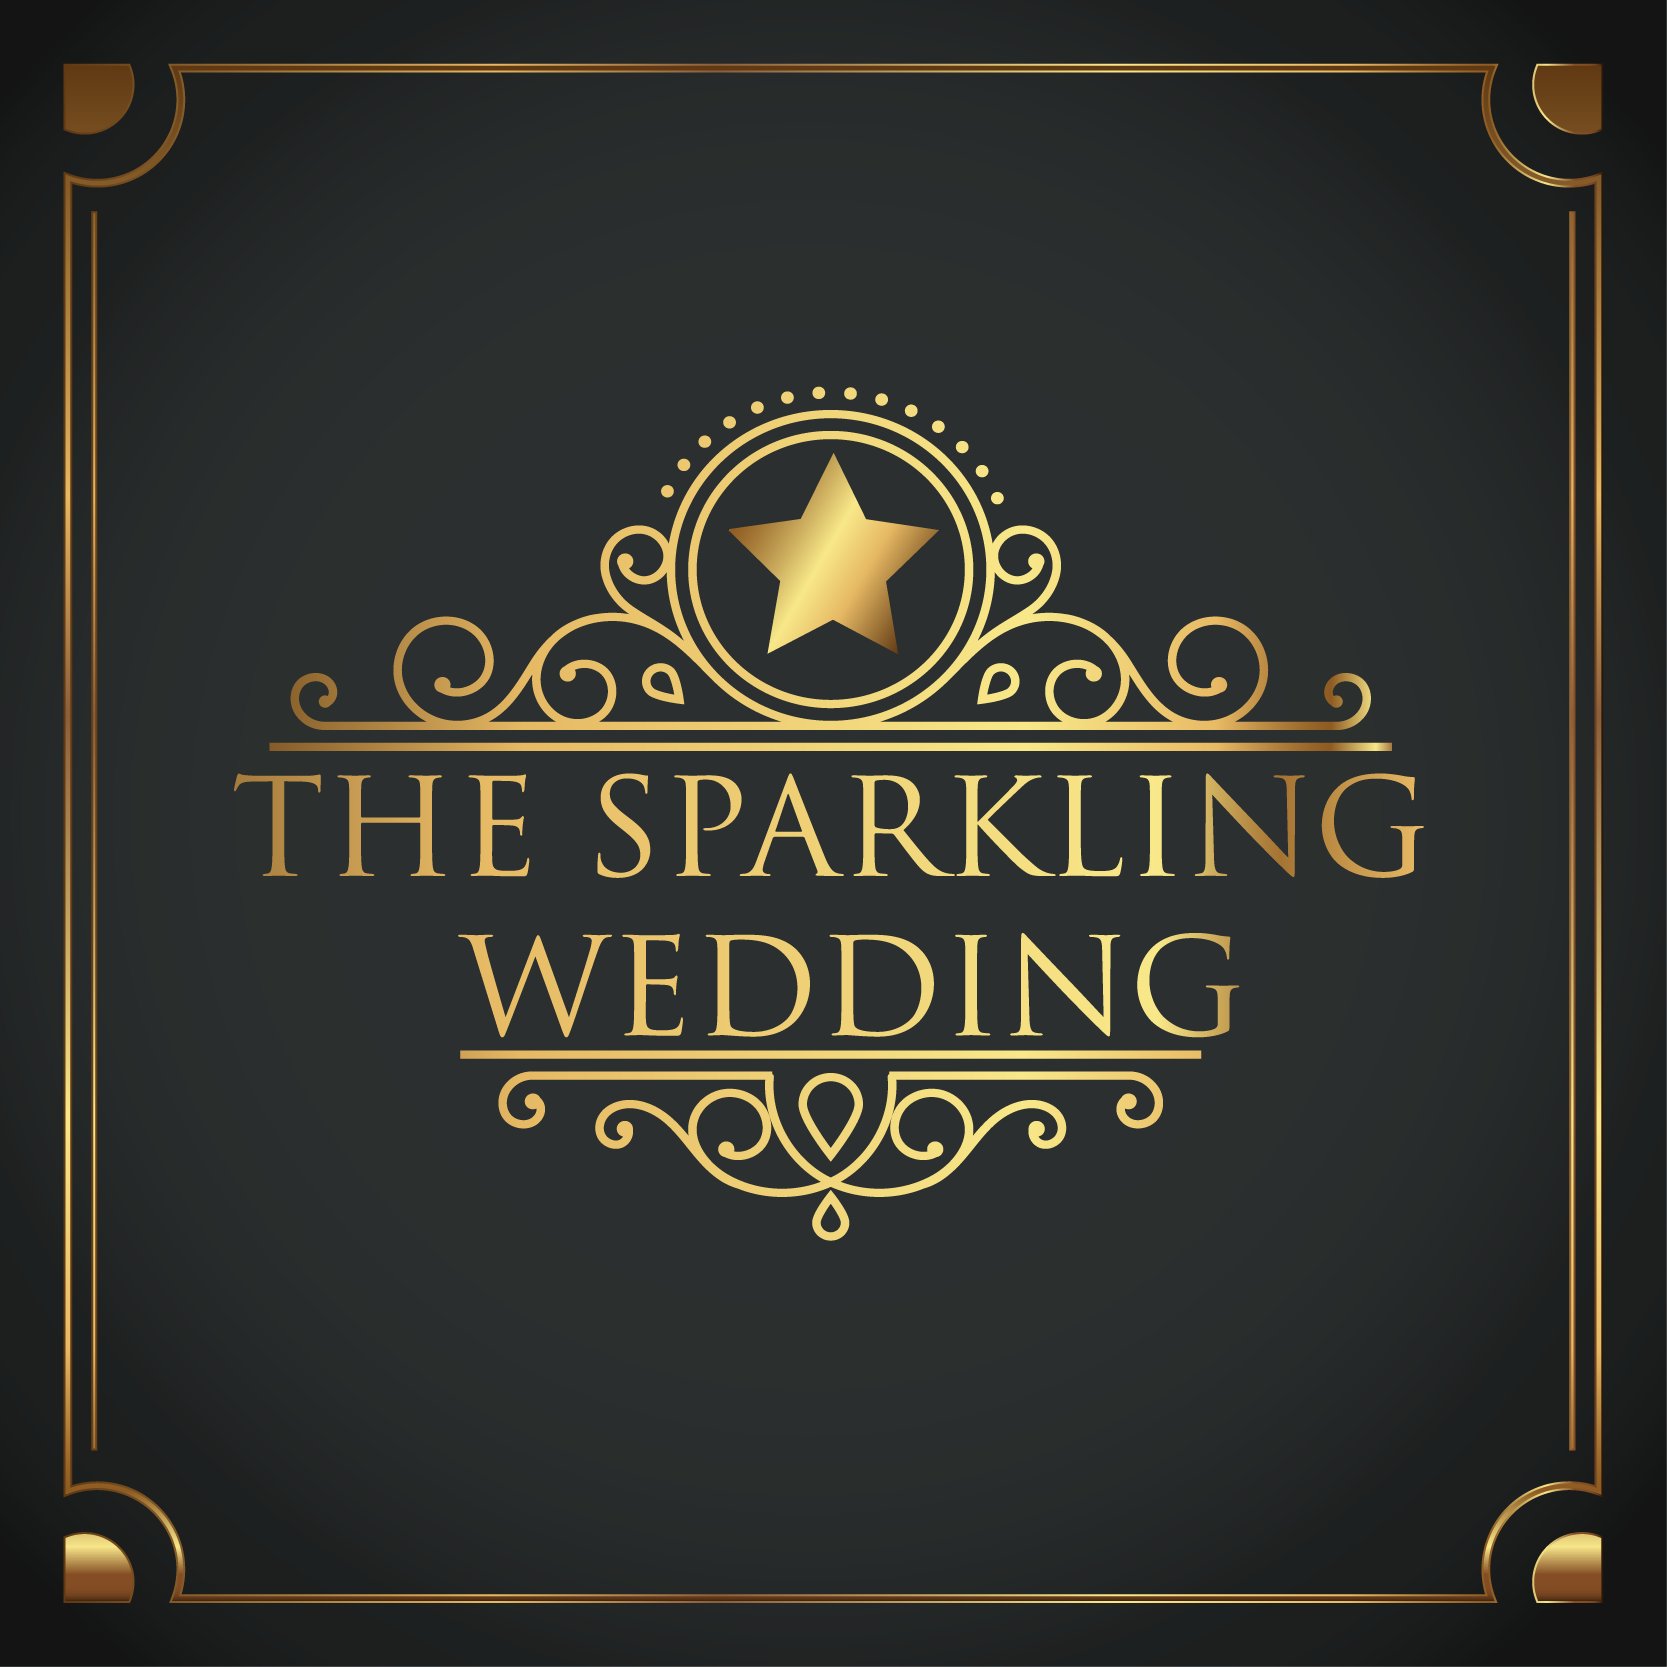 The Sparkling Wedding provides complete wedding  services with a fair mix of photojournalism,creative,candid,documentary and fine art approach.